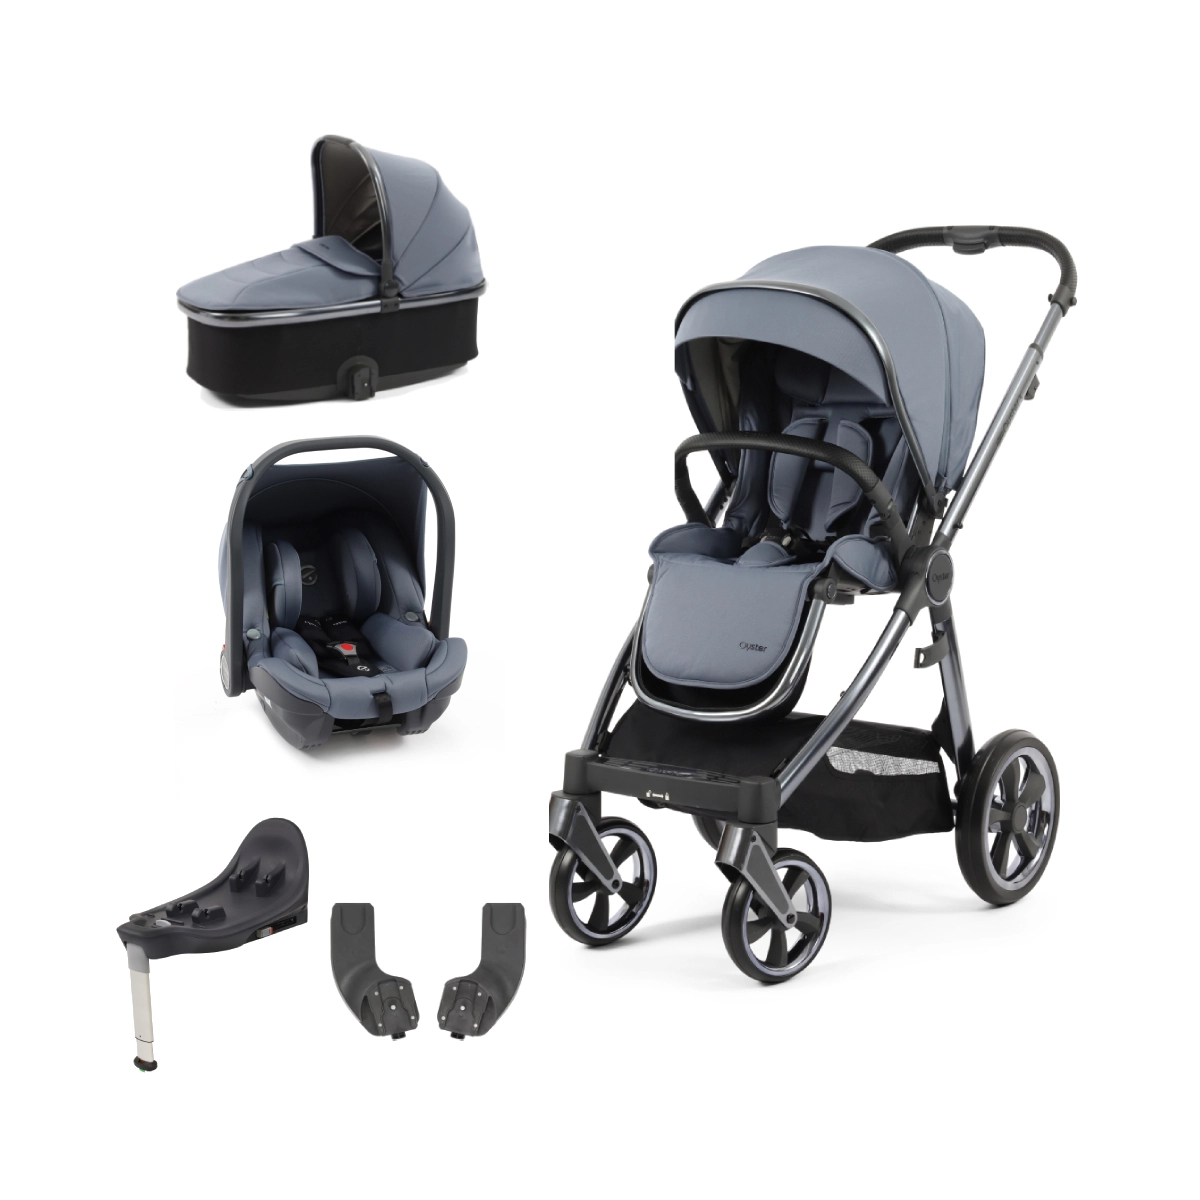 BabyStyle Oyster 3 Gun Metal Chassis Essential Capsule Travel System